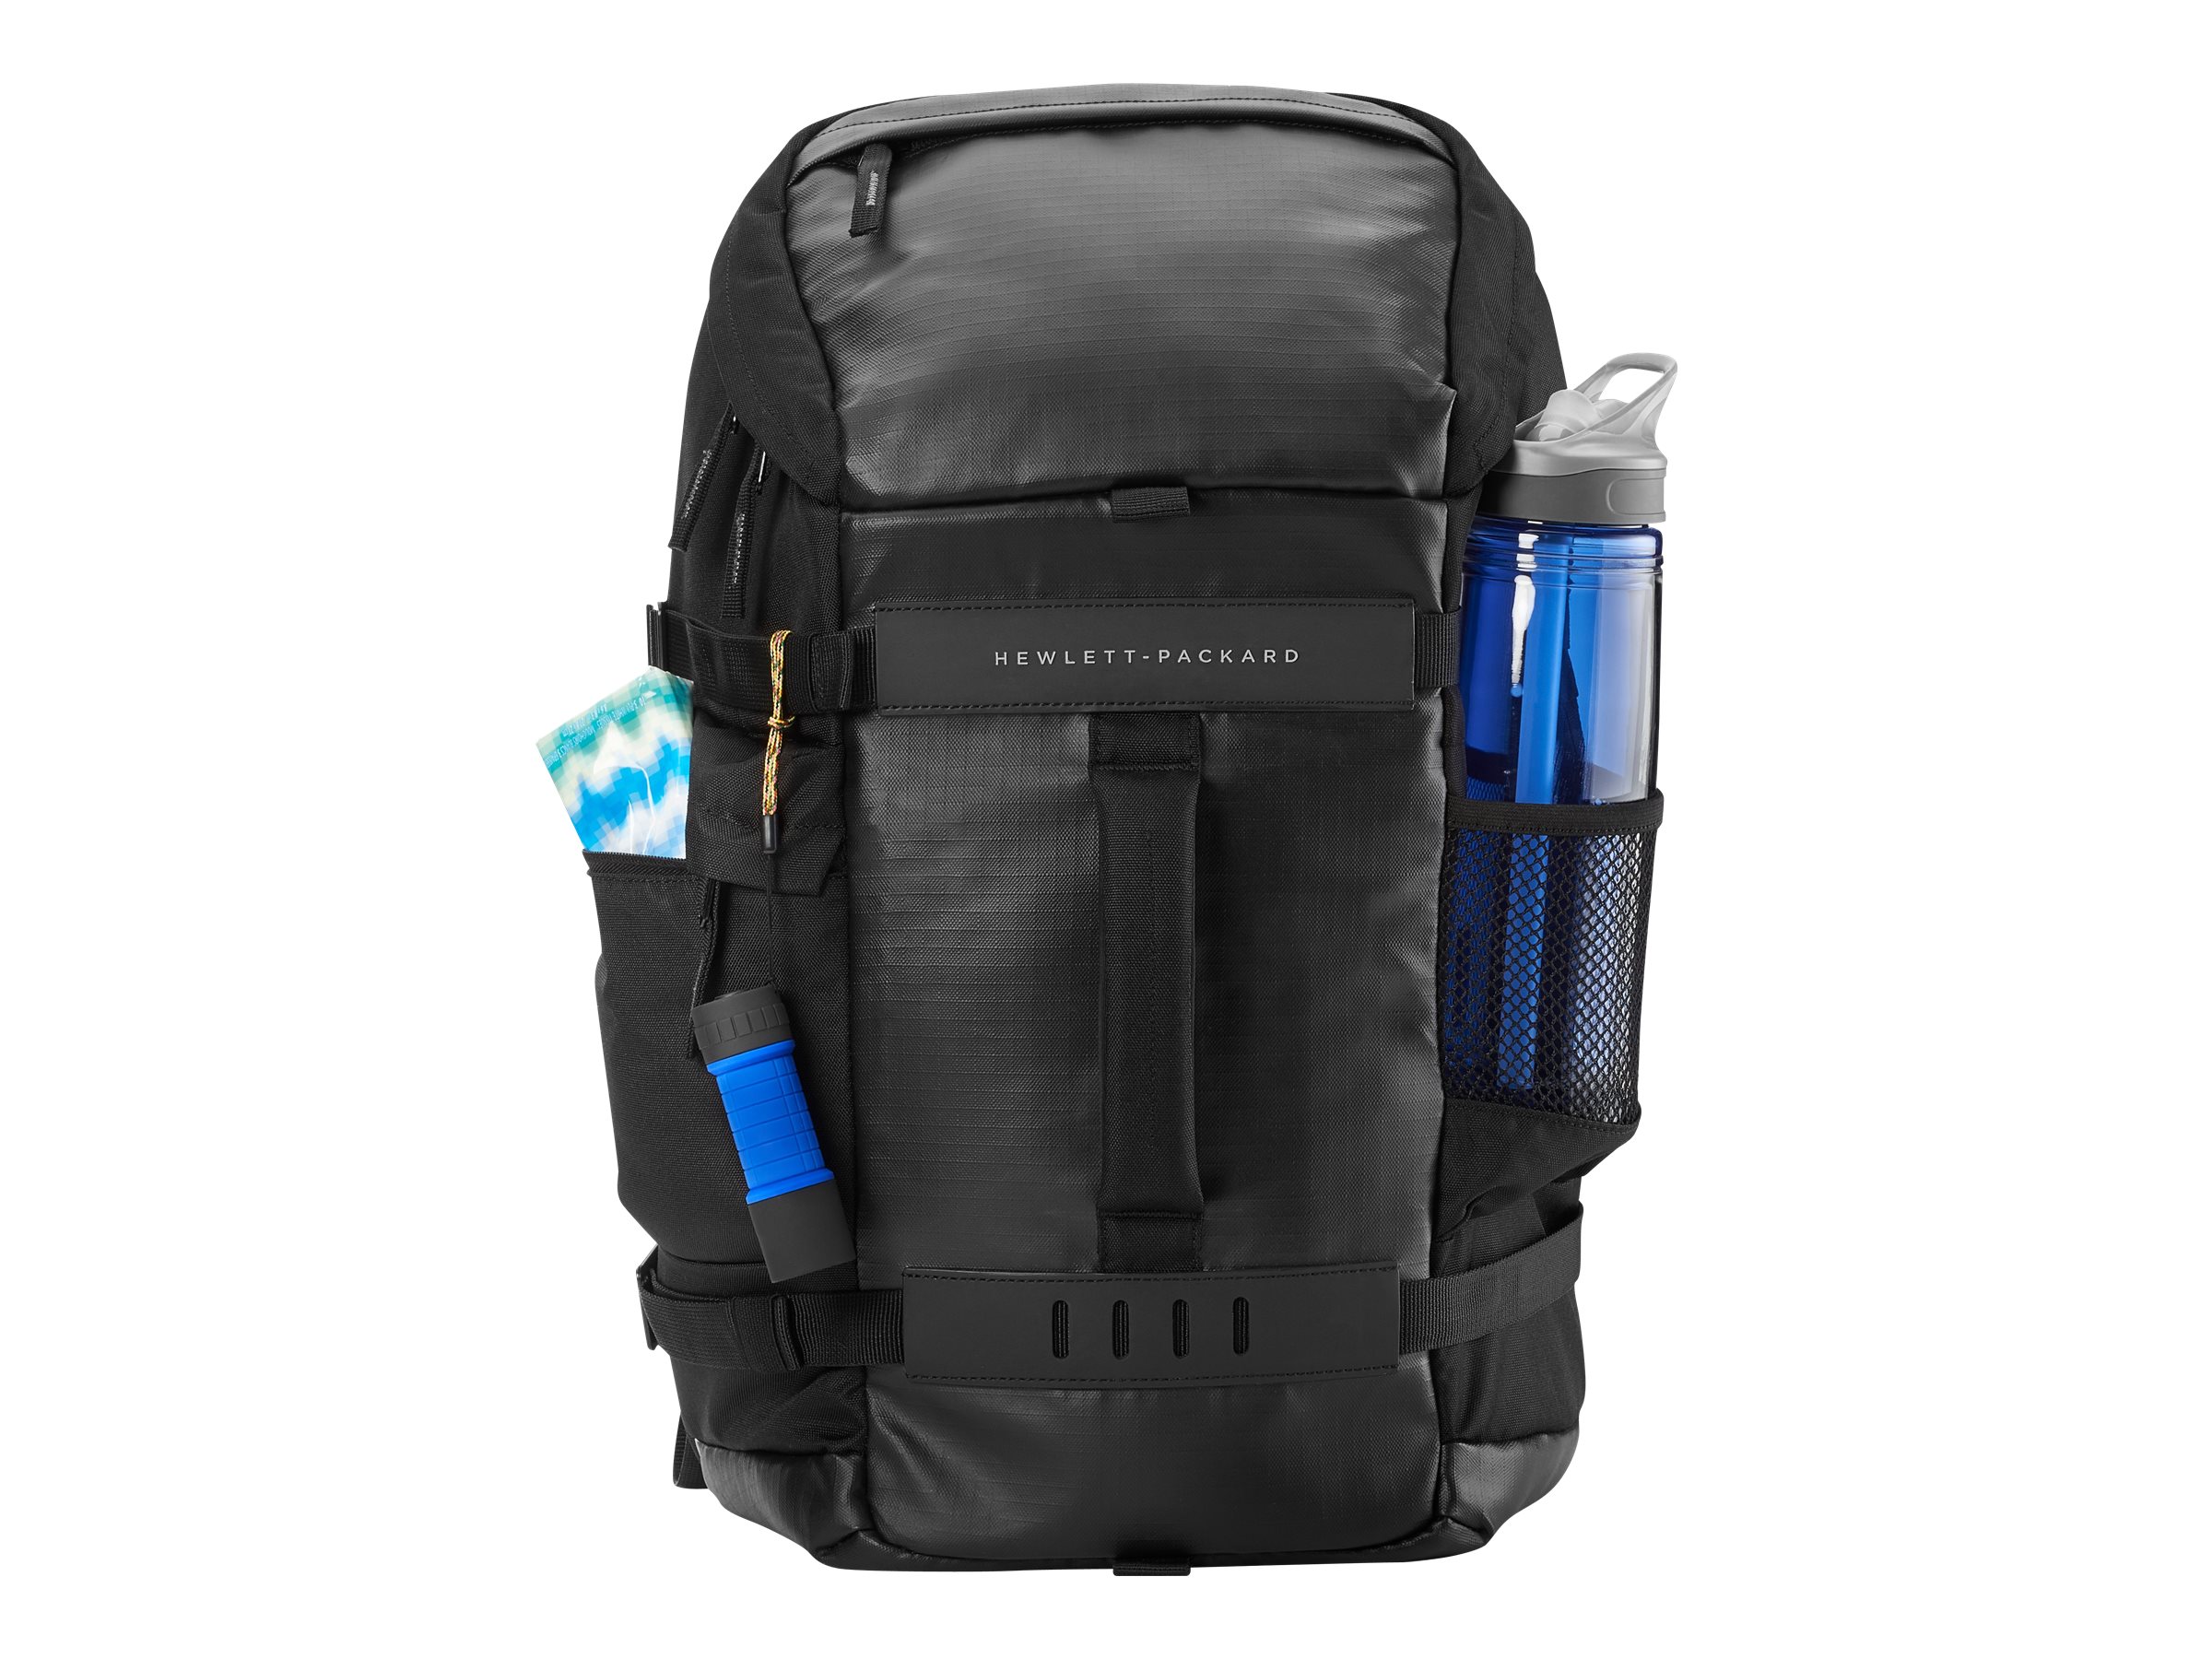 Buy HP Odyssey Backpack, Backpack for s up to 15.6